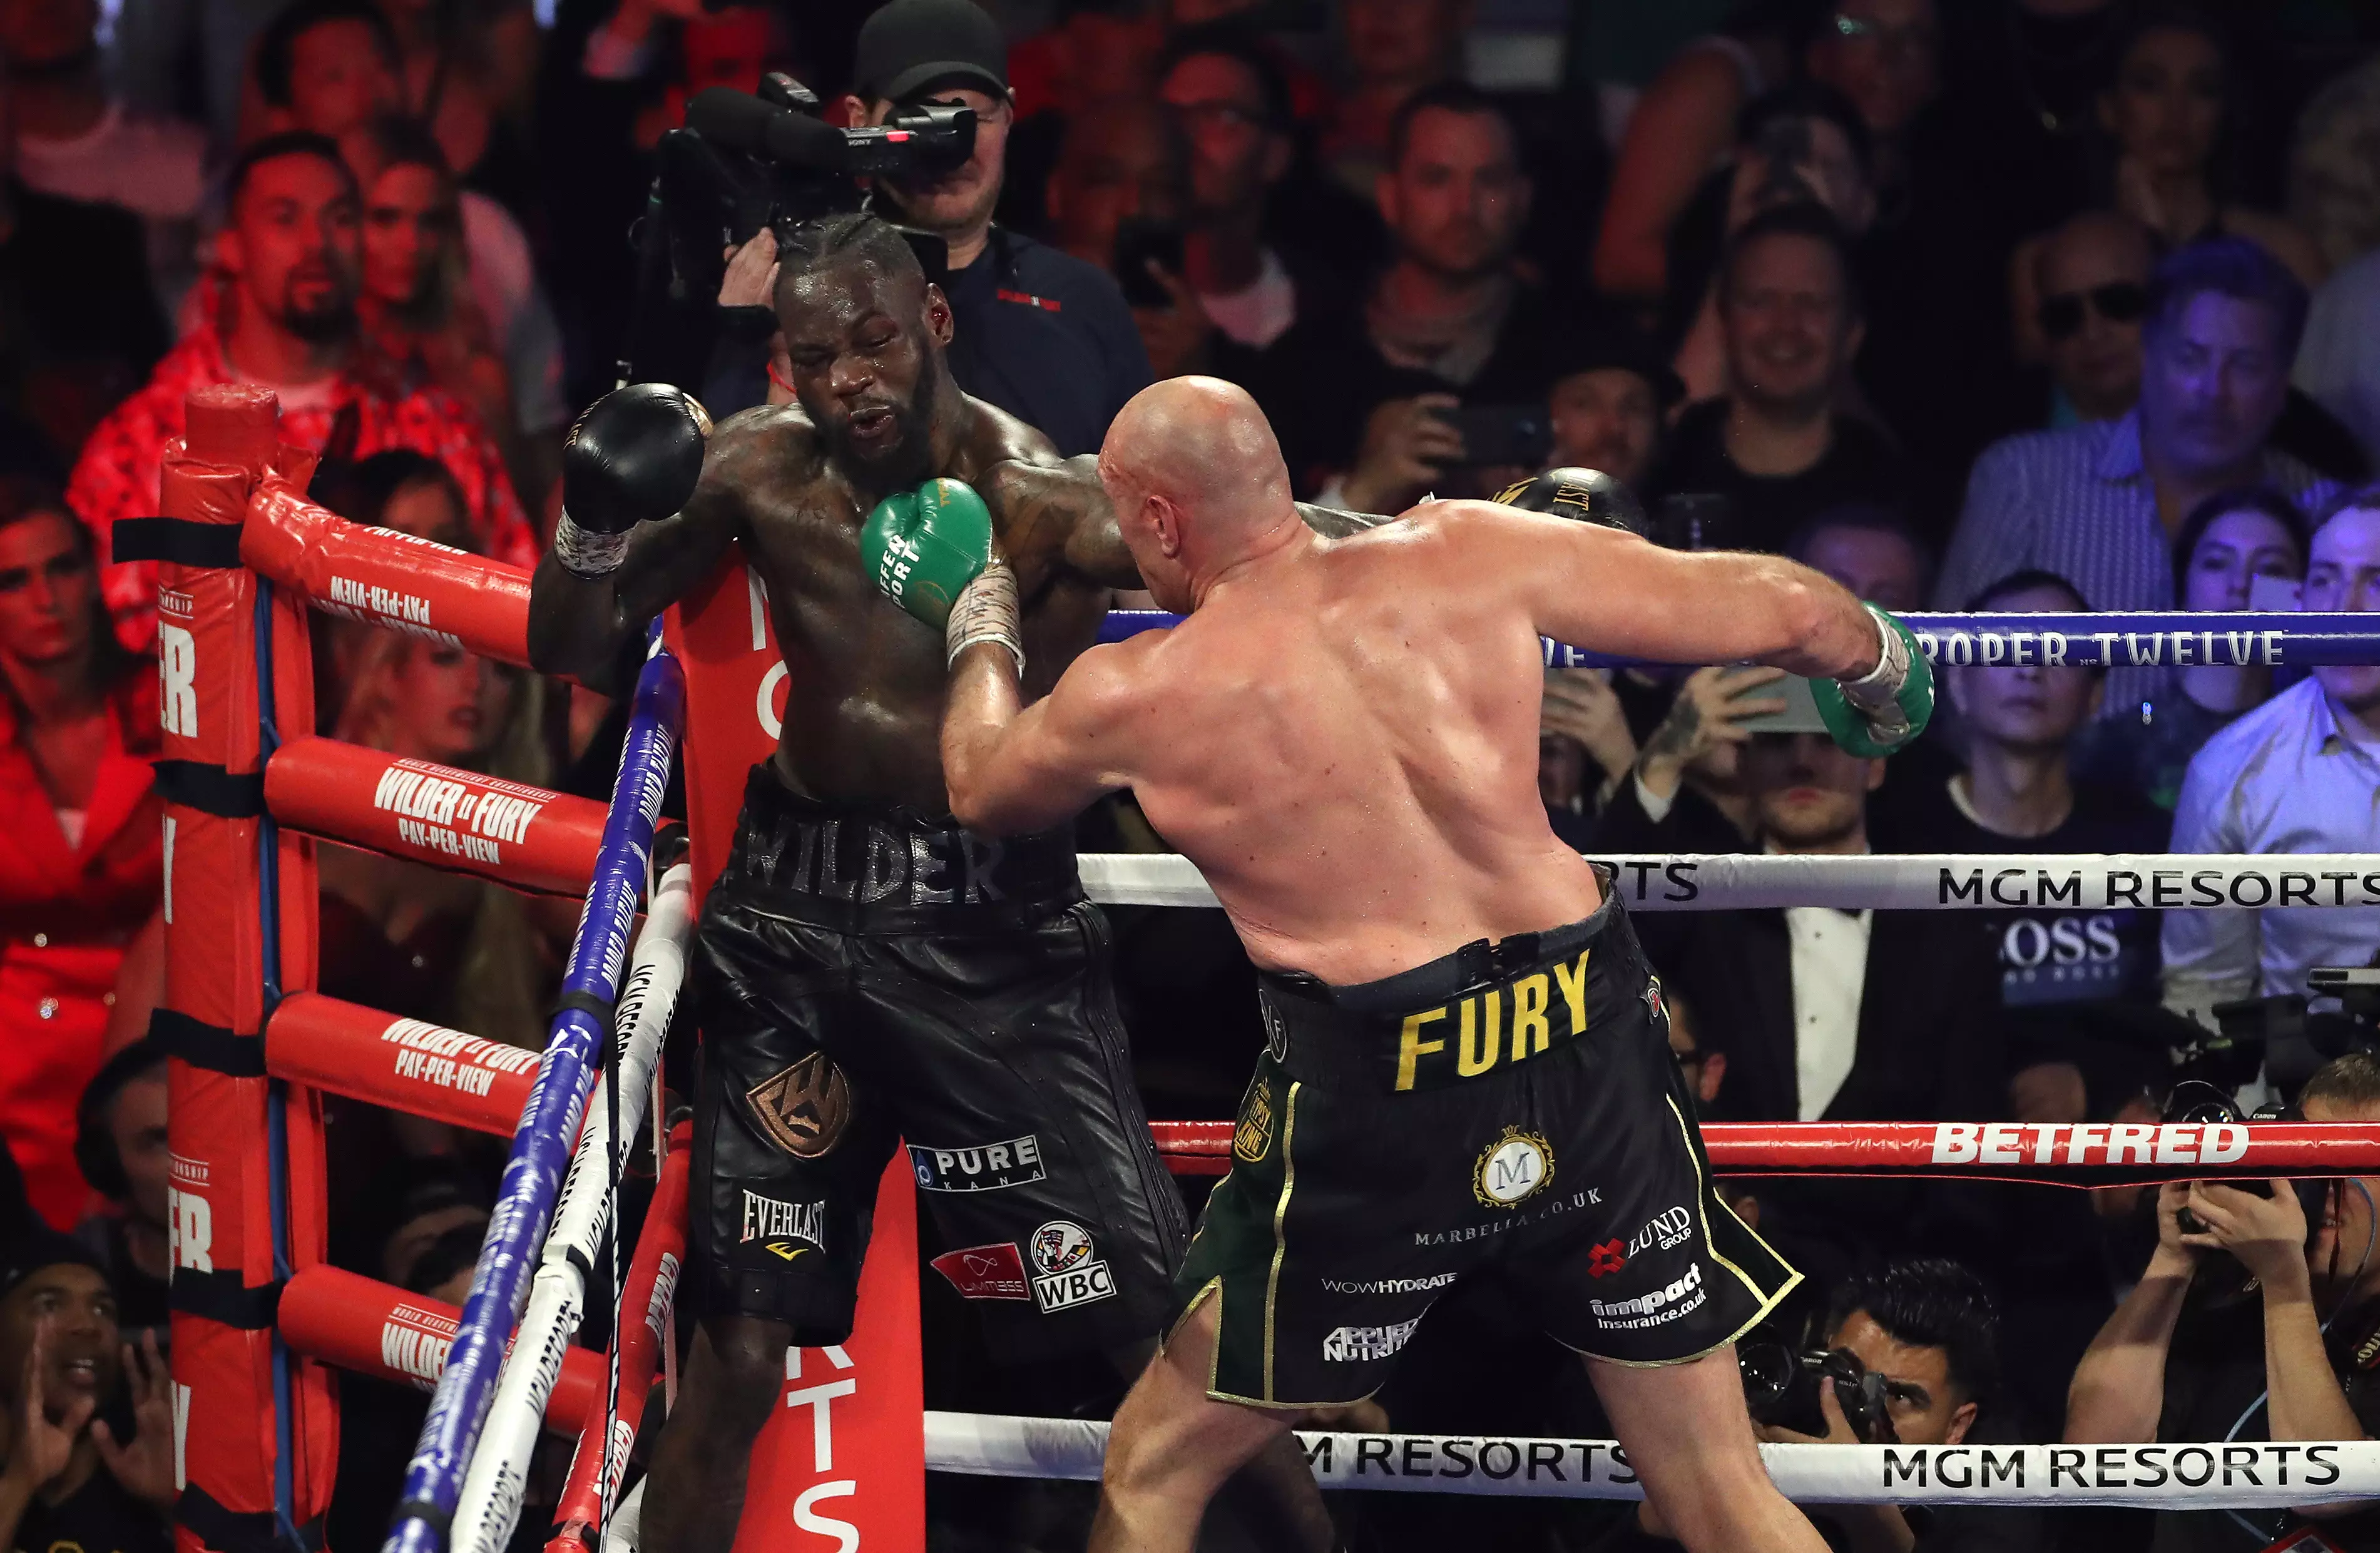 Wilder didn't look in a state to carry on. Image: PA Images